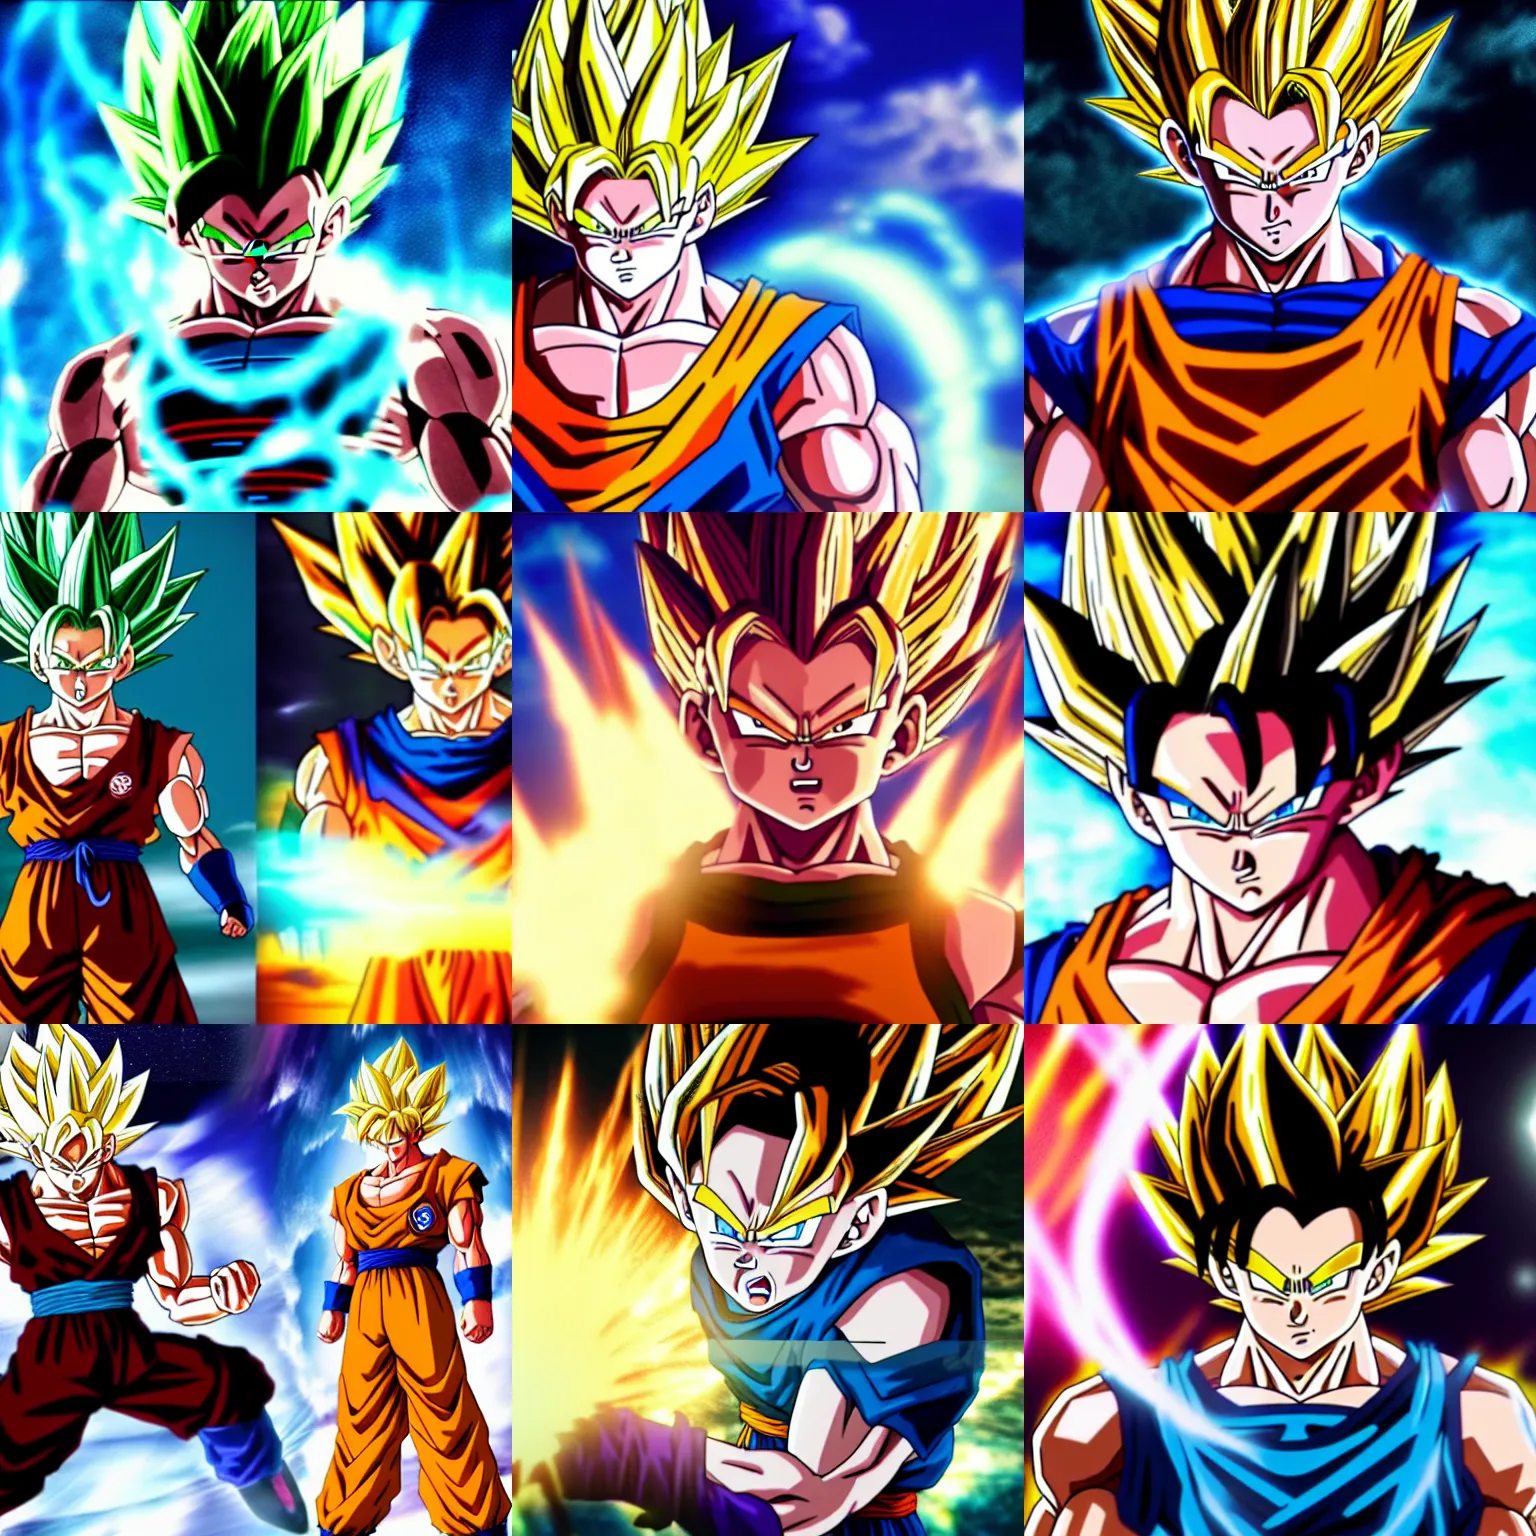 dragon ball z all characters and transformations